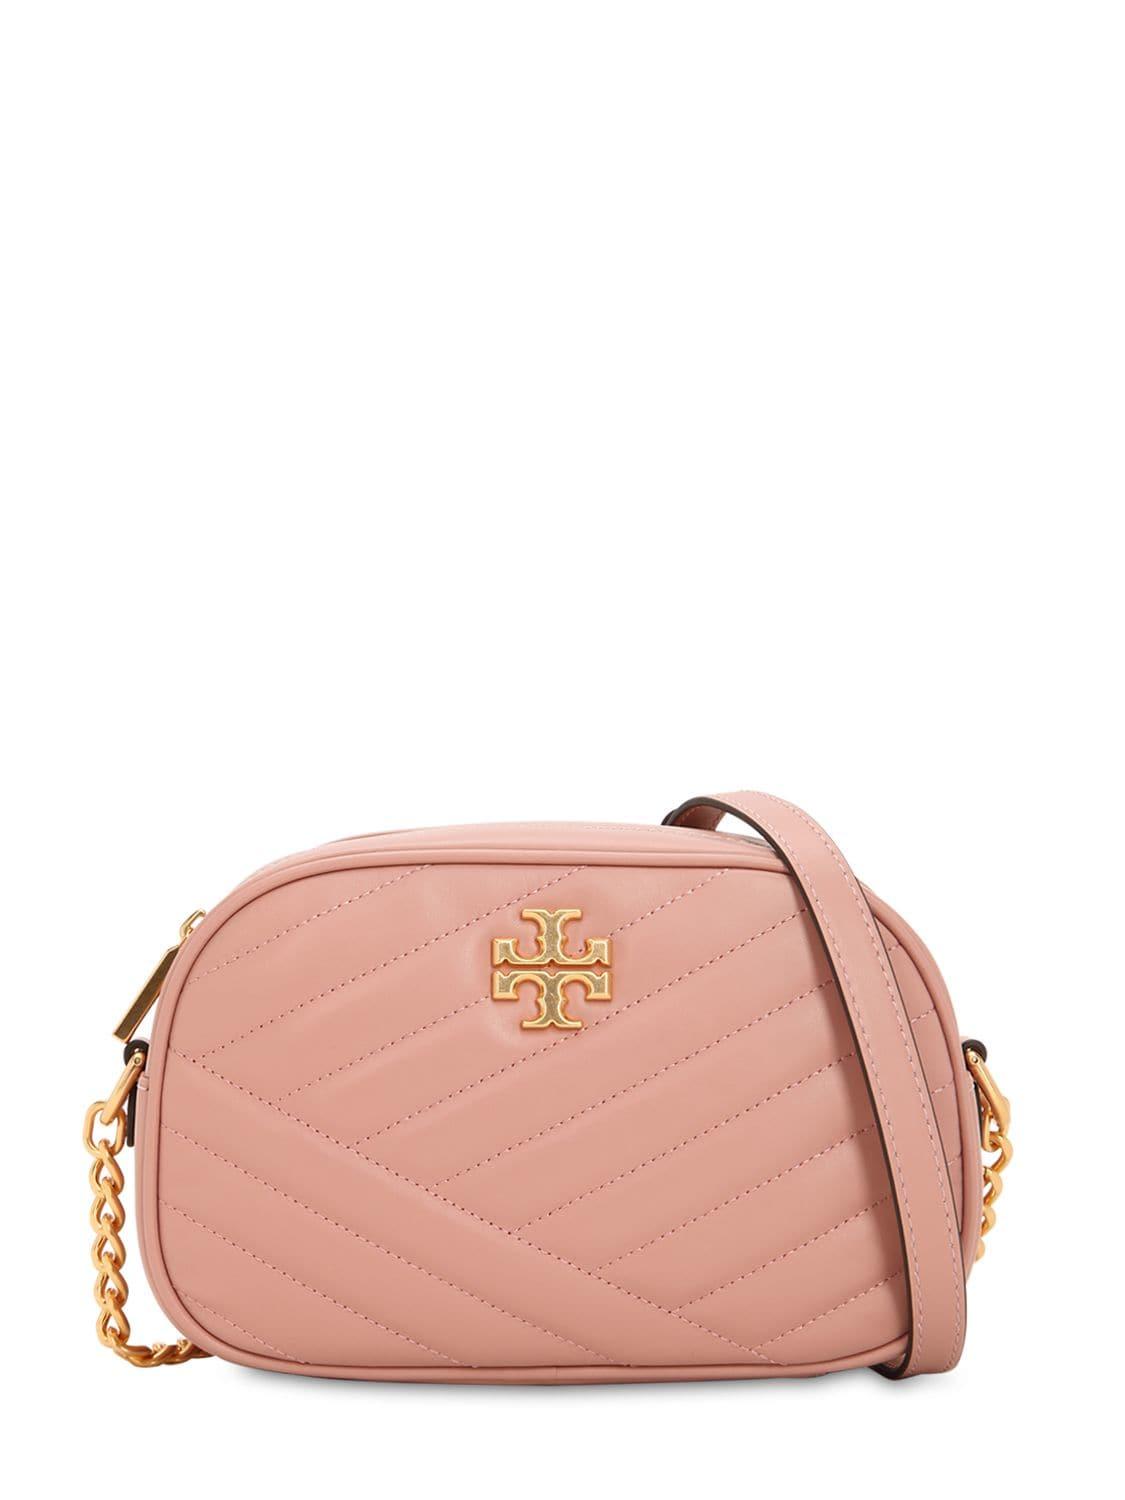 Tory Burch Quilted Leather Shoulder Bag in Pink - Lyst